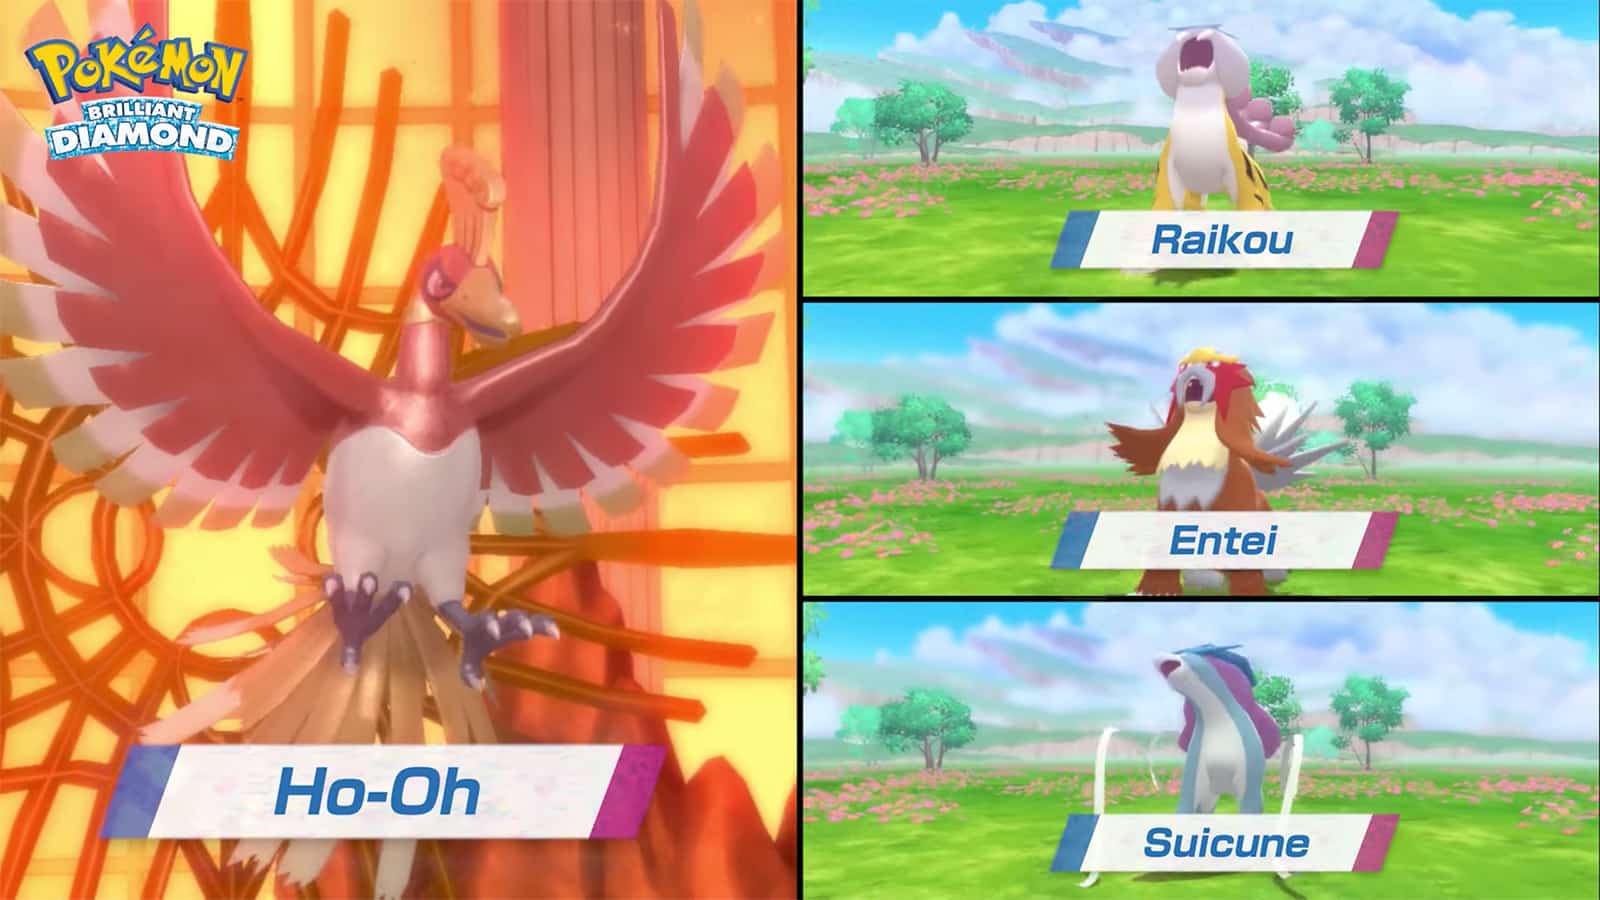 All Version Exclusives in Pokémon Brilliant Diamond and Shining